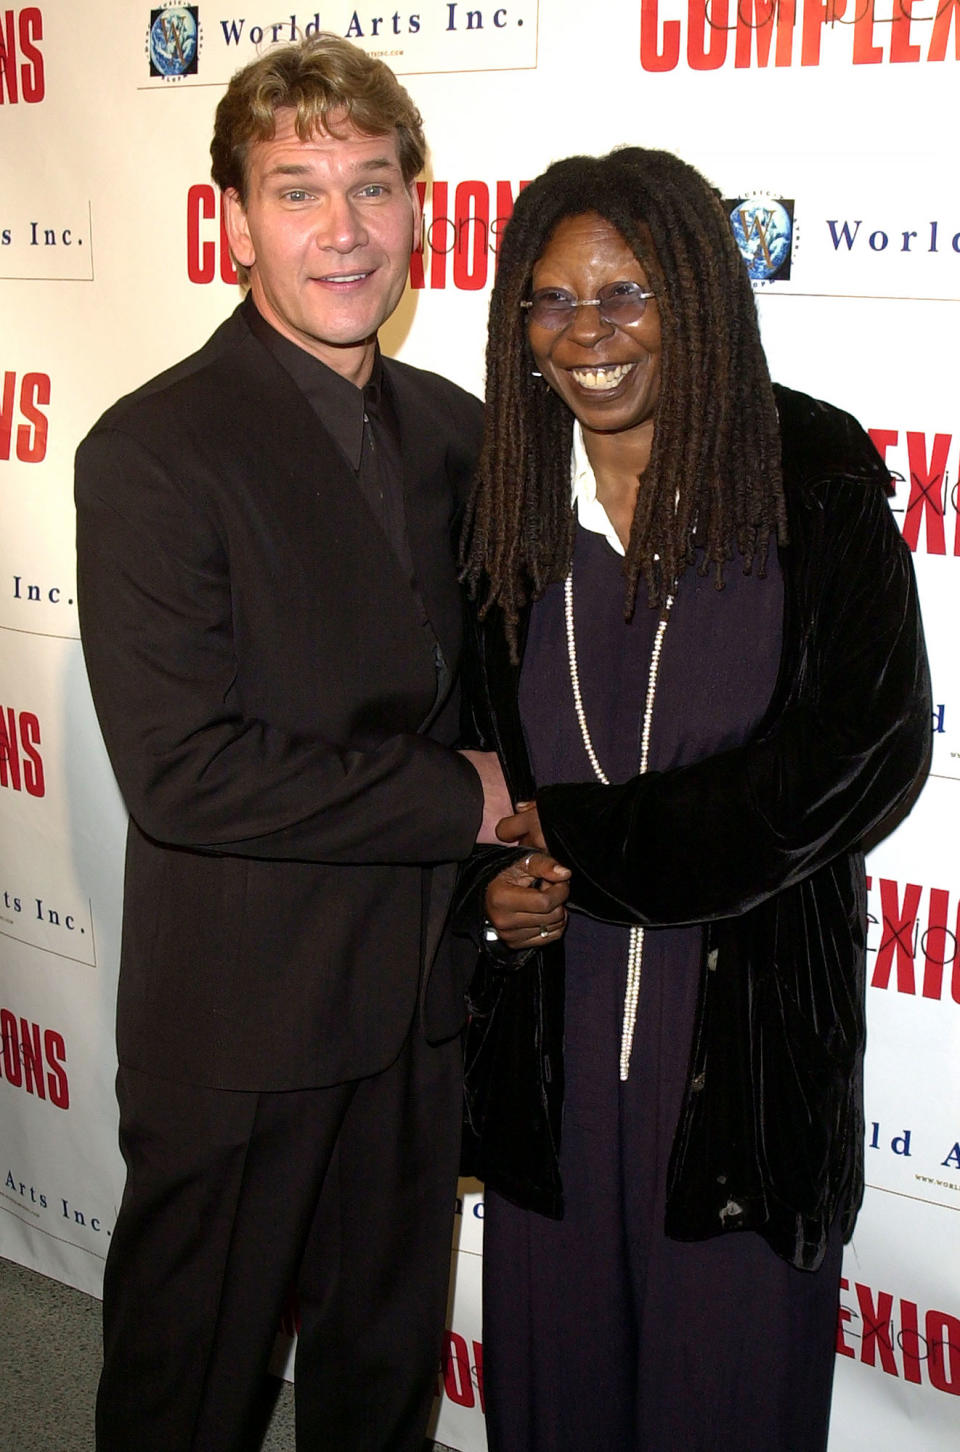 Patrick Swayze Whoopi Goldberg Bits and Pieces Memoir Reveals Her Past Drug Addiction and Famous Friendships